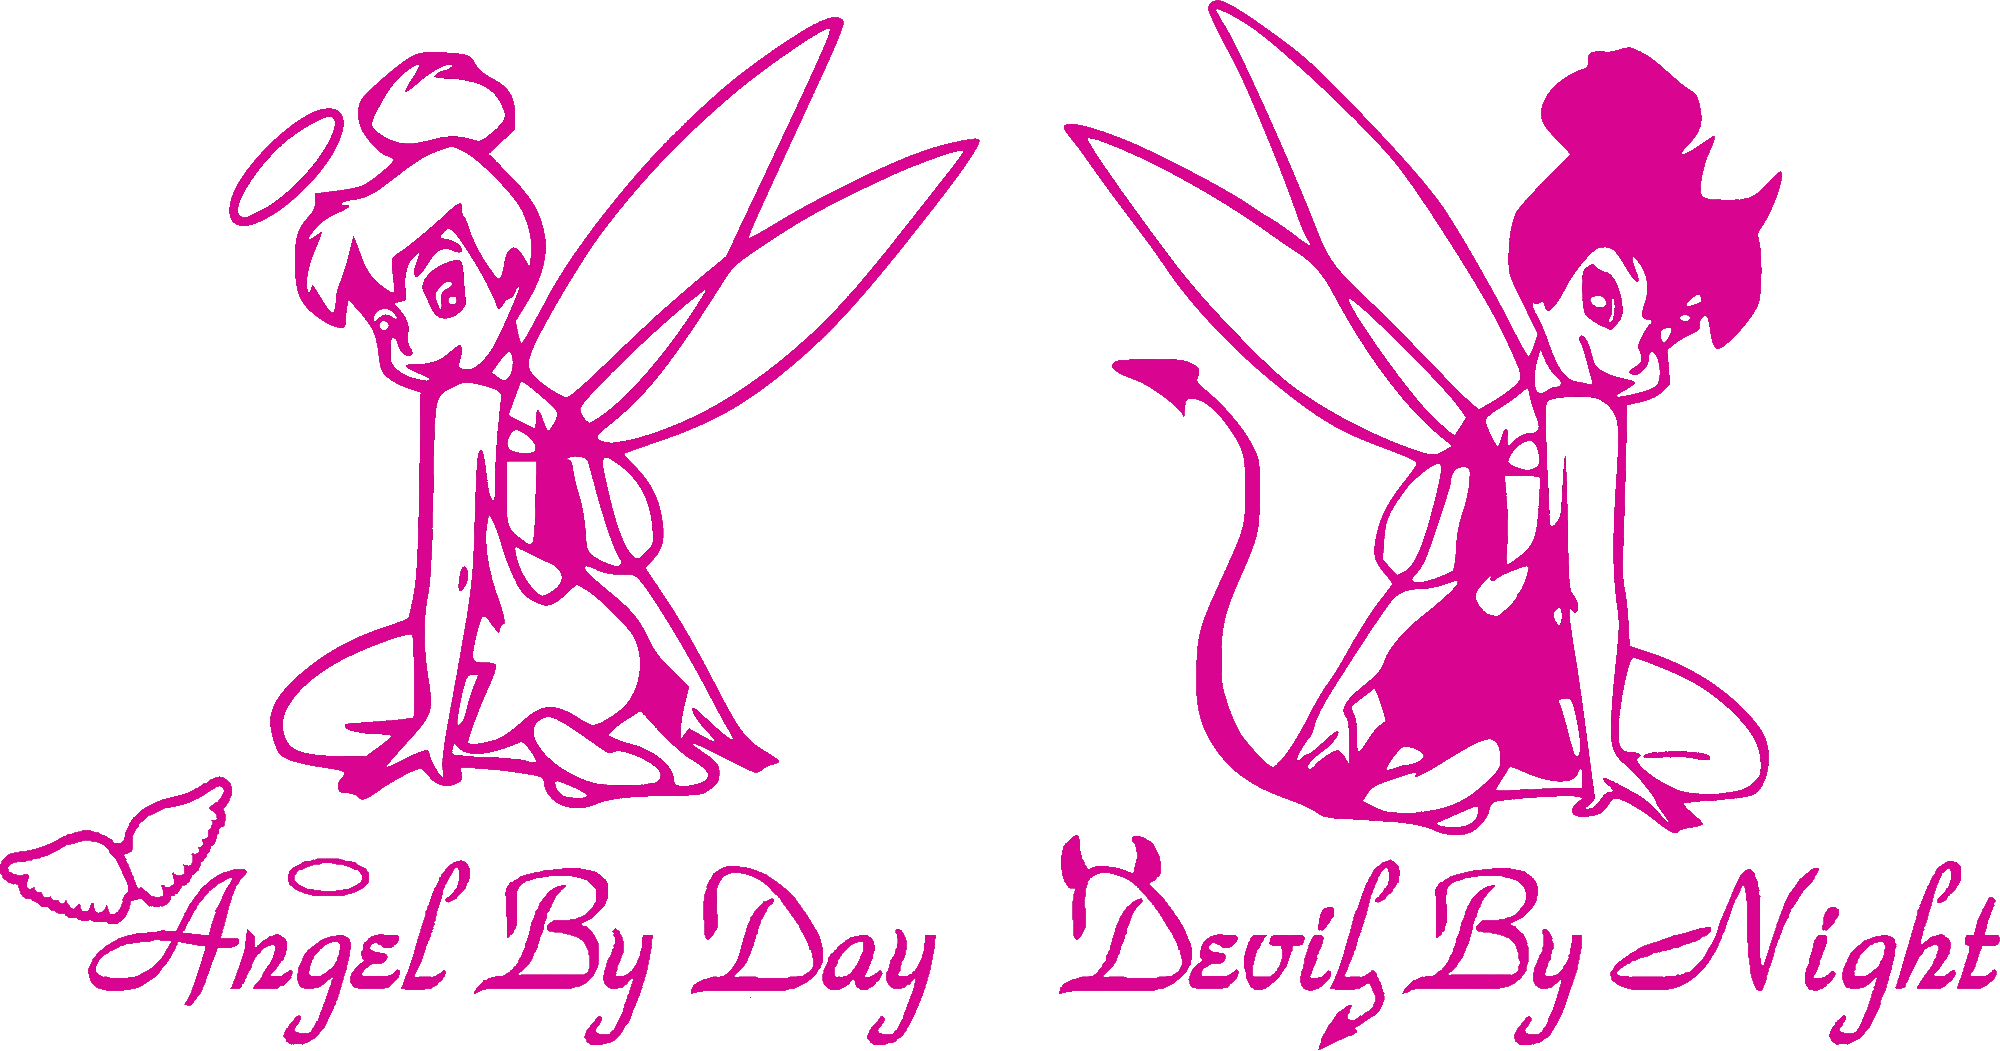 tinkerbell clipart pink